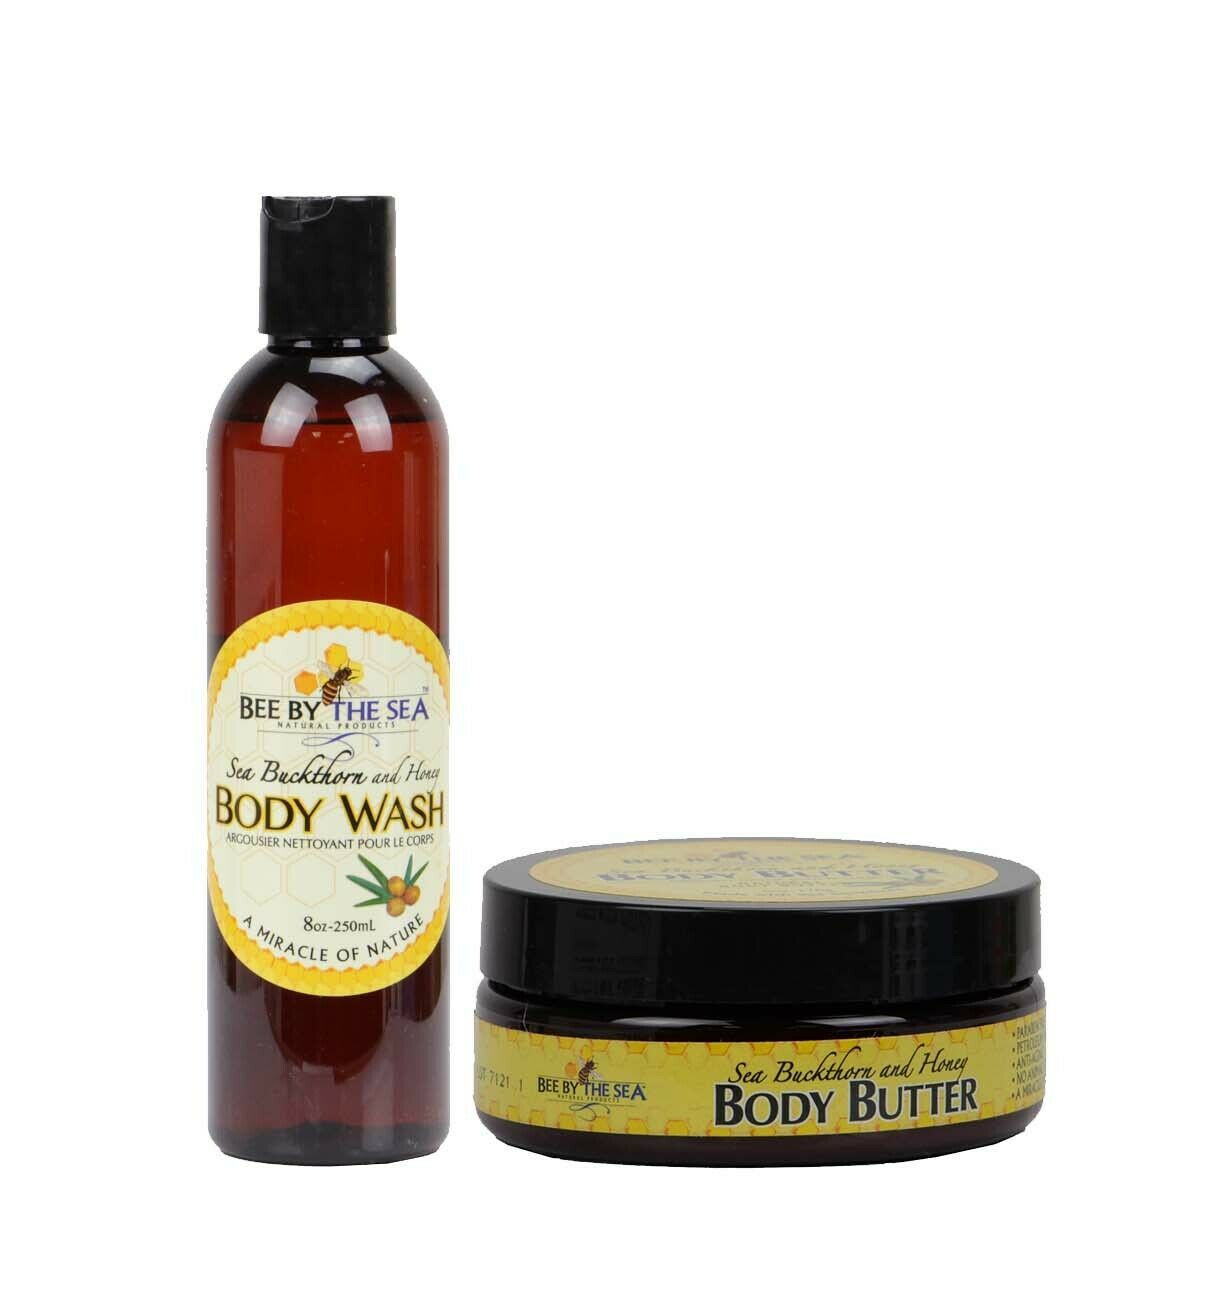 Bee By The Sea Body Wash & Body Butter Skin care Set